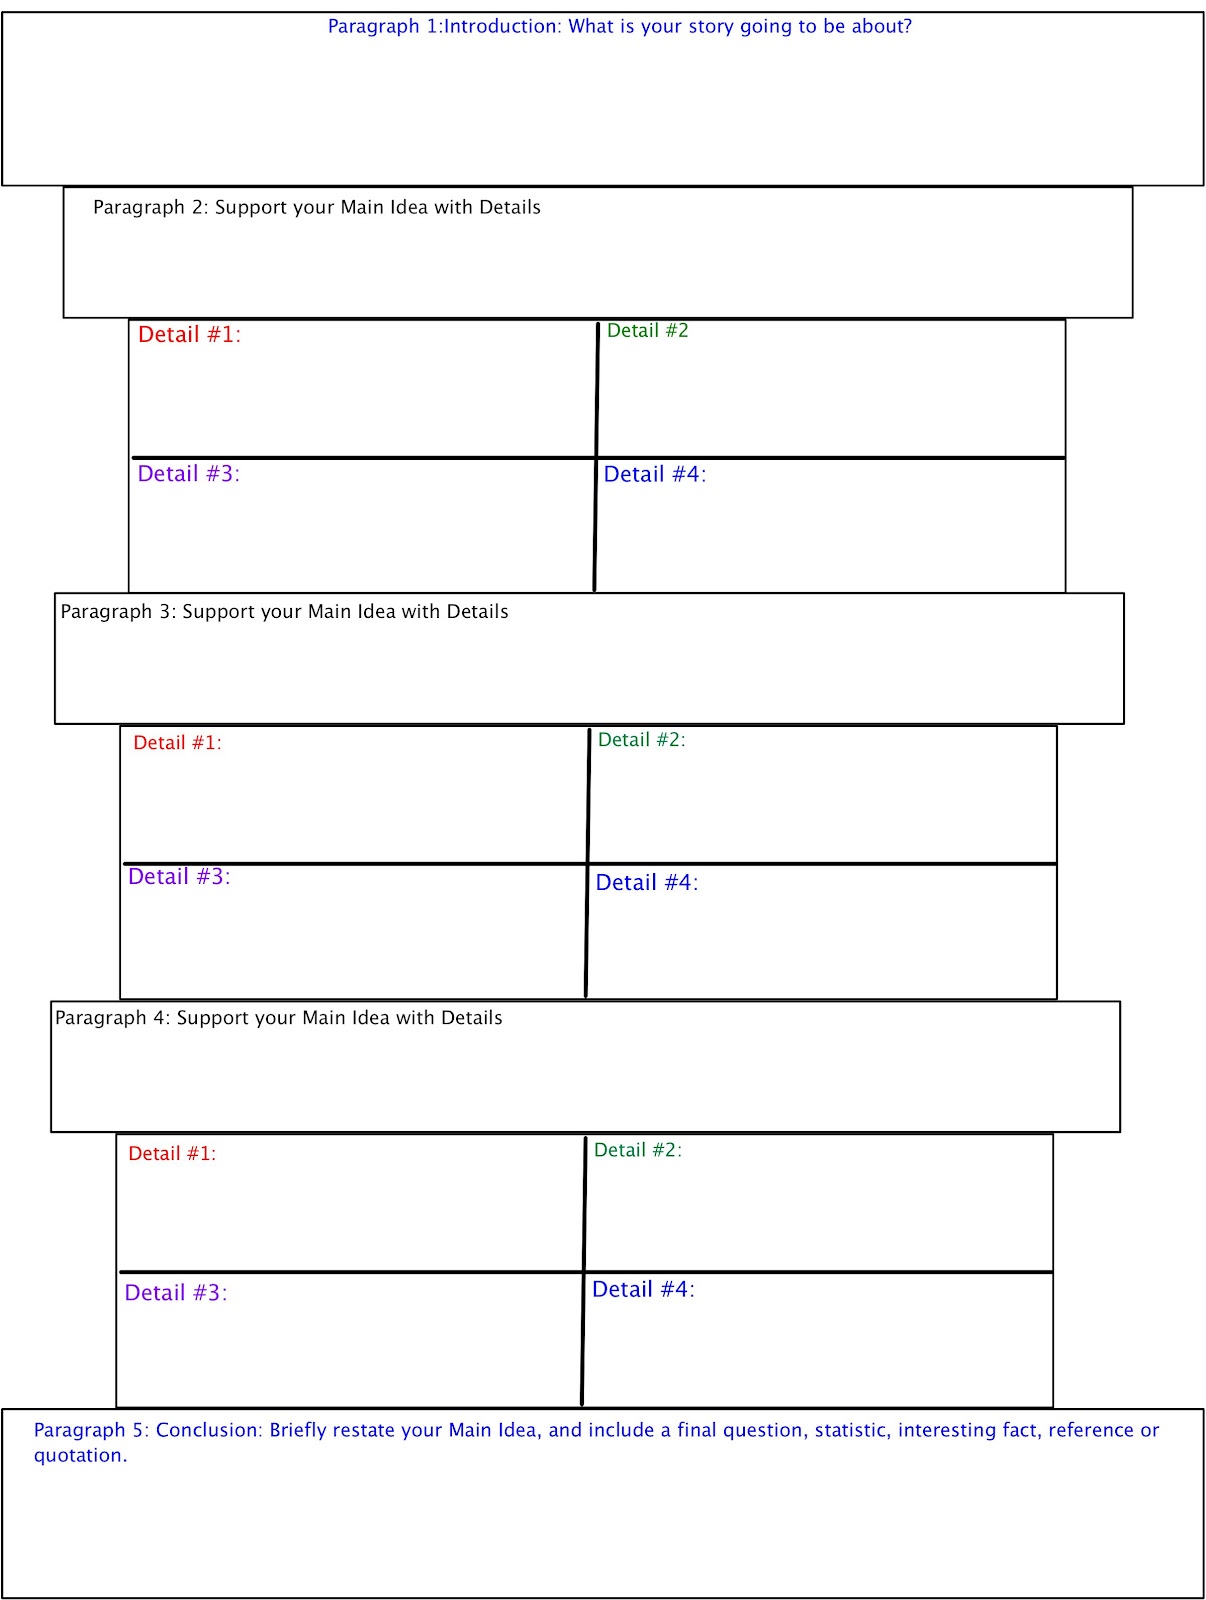 graphic organizers for writing an essay for a